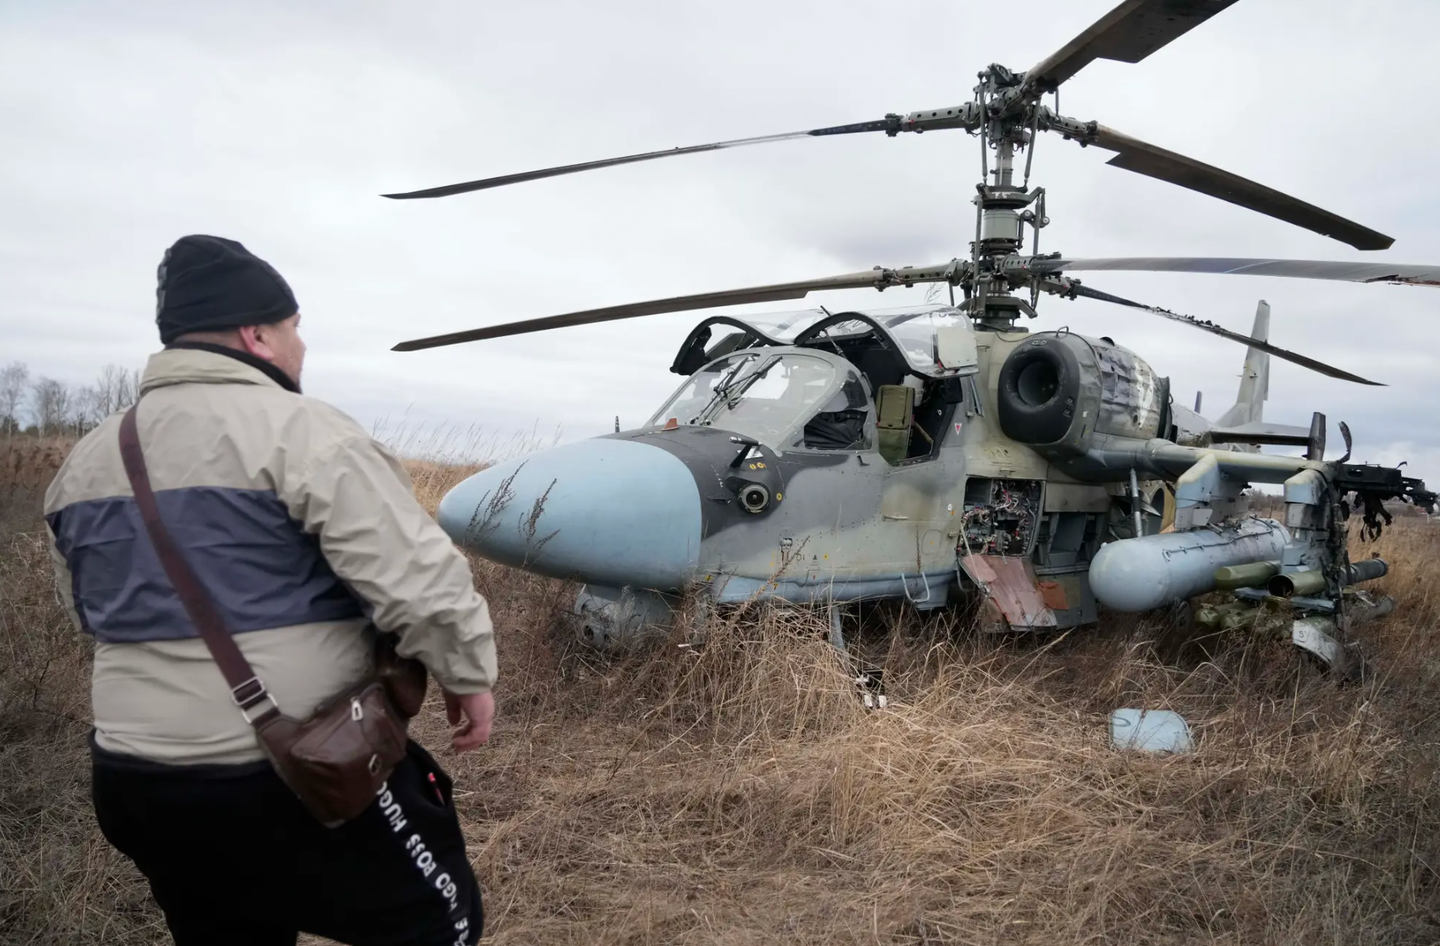 A man stands in front of a Ka-52 attack helicopter forced to land in a field outside Kyiv, Ukraine, on February 24, 2022. Note that the crew seats and canopy remain in place, with the white cylinders associated with the rocket assembly visible behind the headrests.&nbsp;<em>AP Photo/Efrem Lukatsky</em>